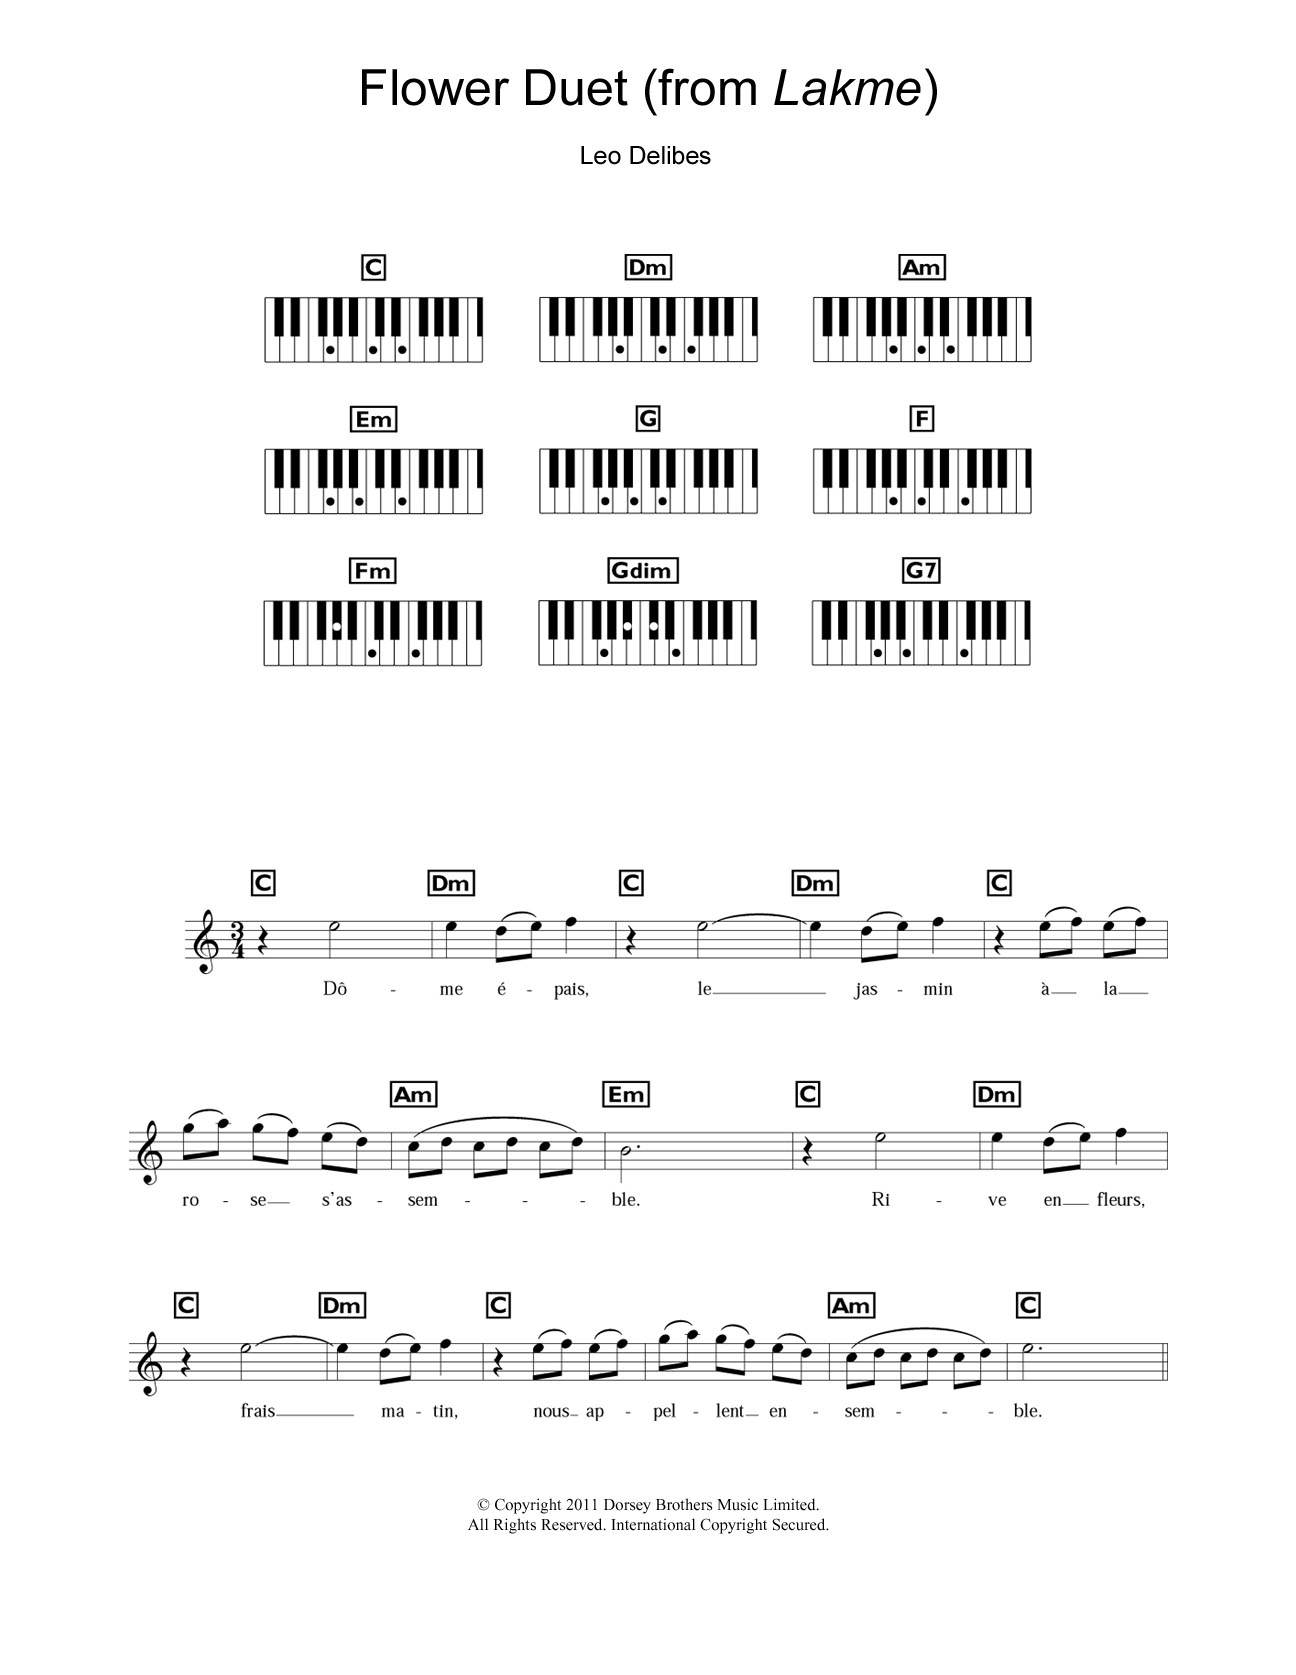 Download Leo Delibes Flower Duet (from Lakme) Sheet Music